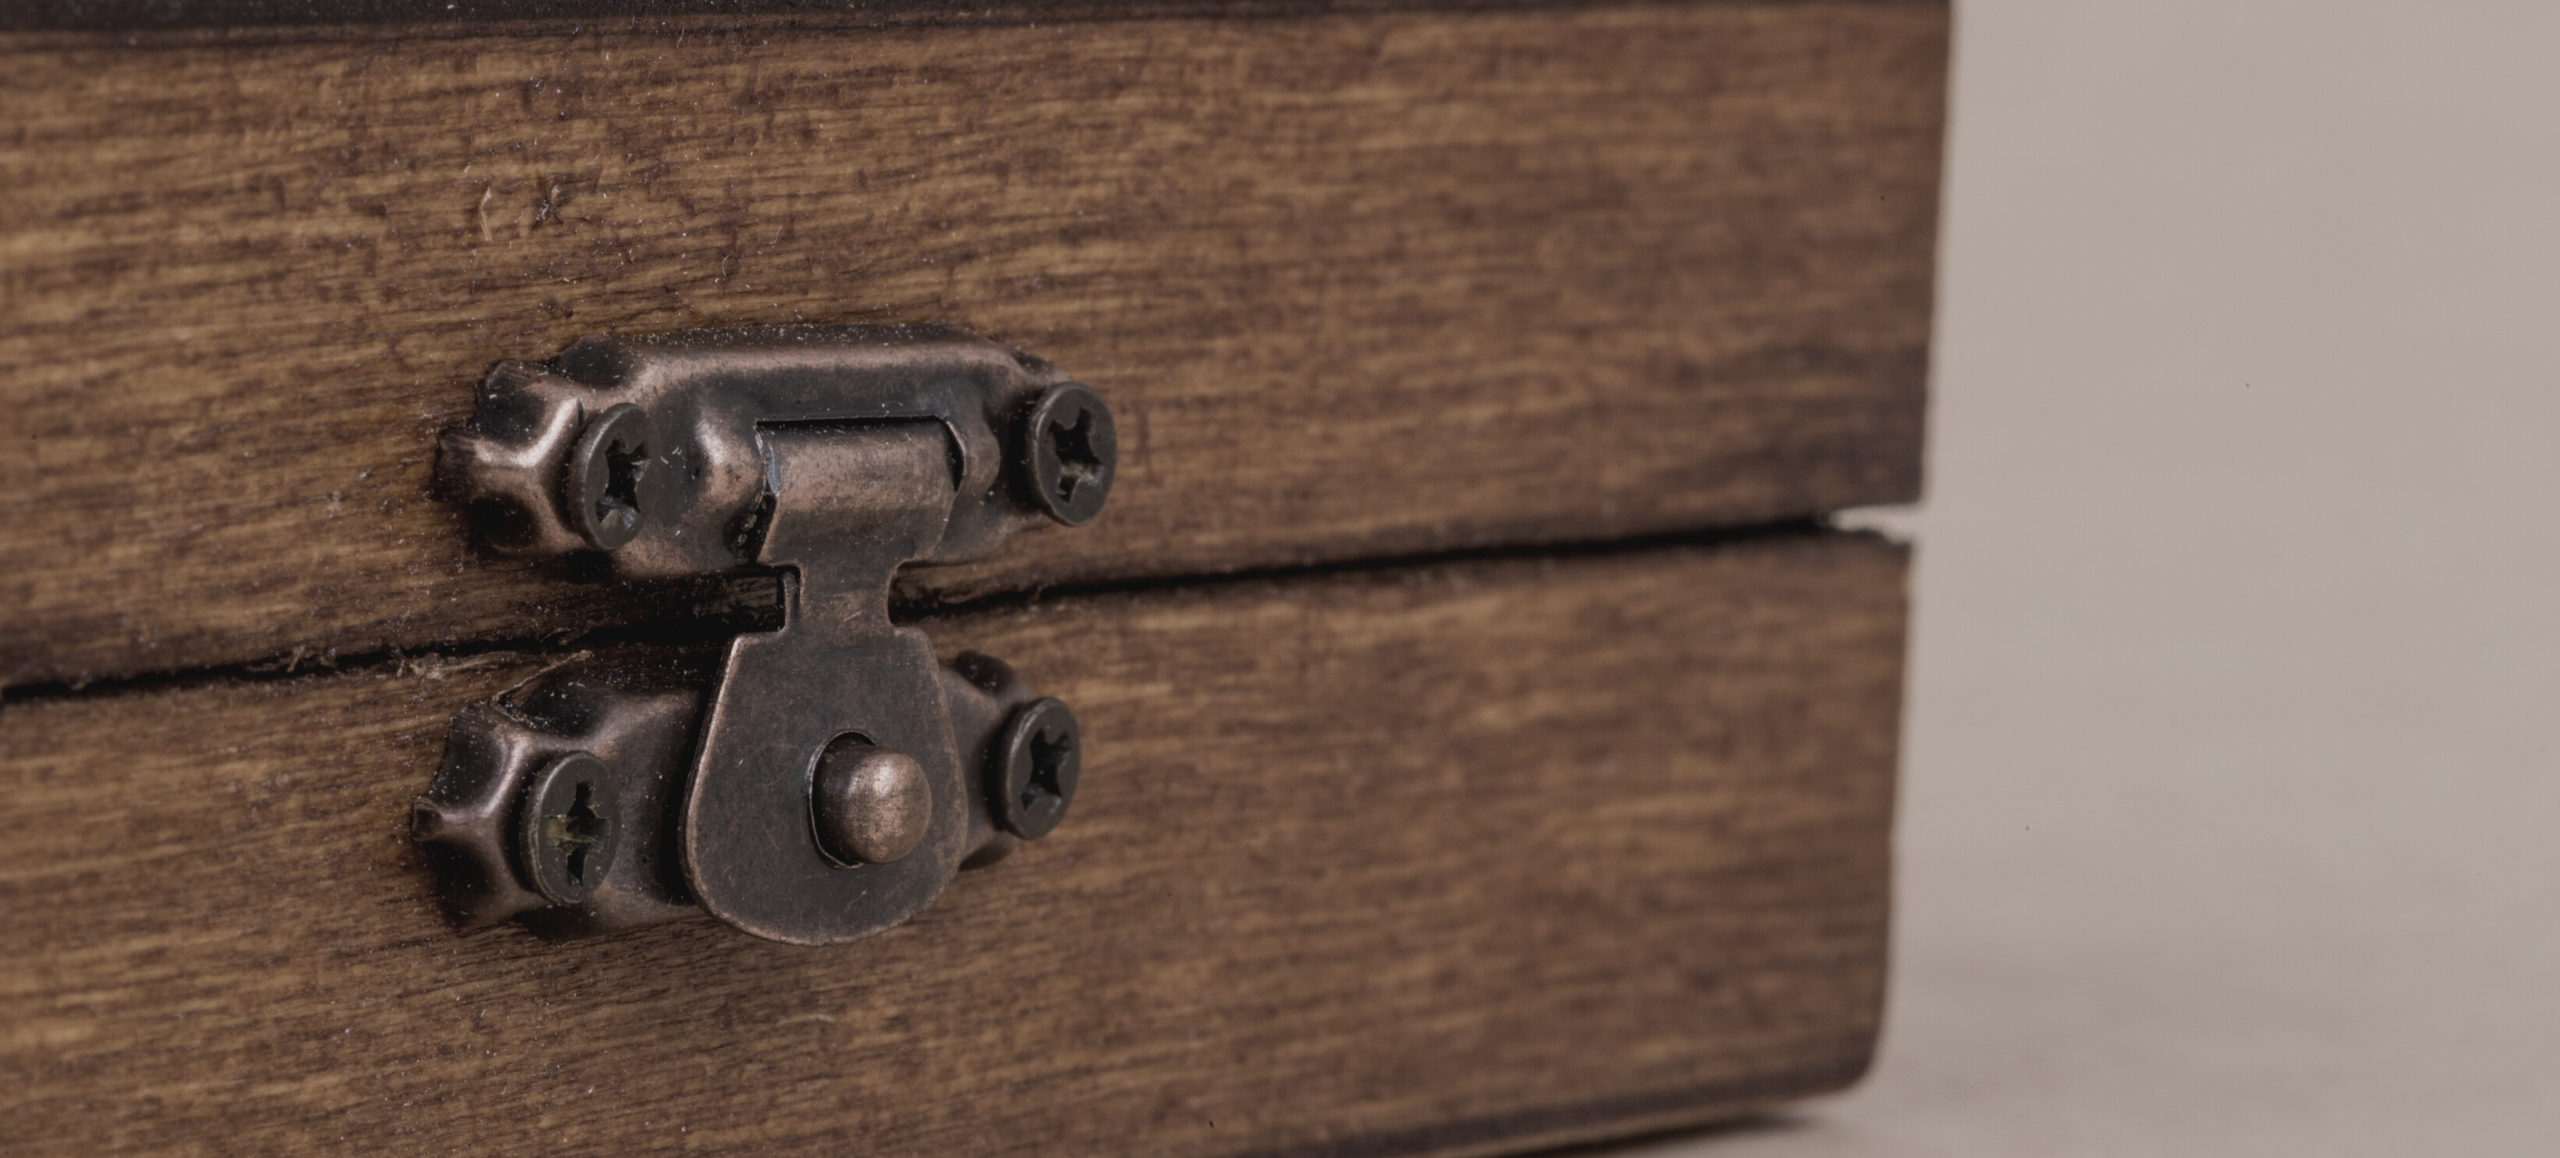 Close-up photo of a wooden box with a metal latch